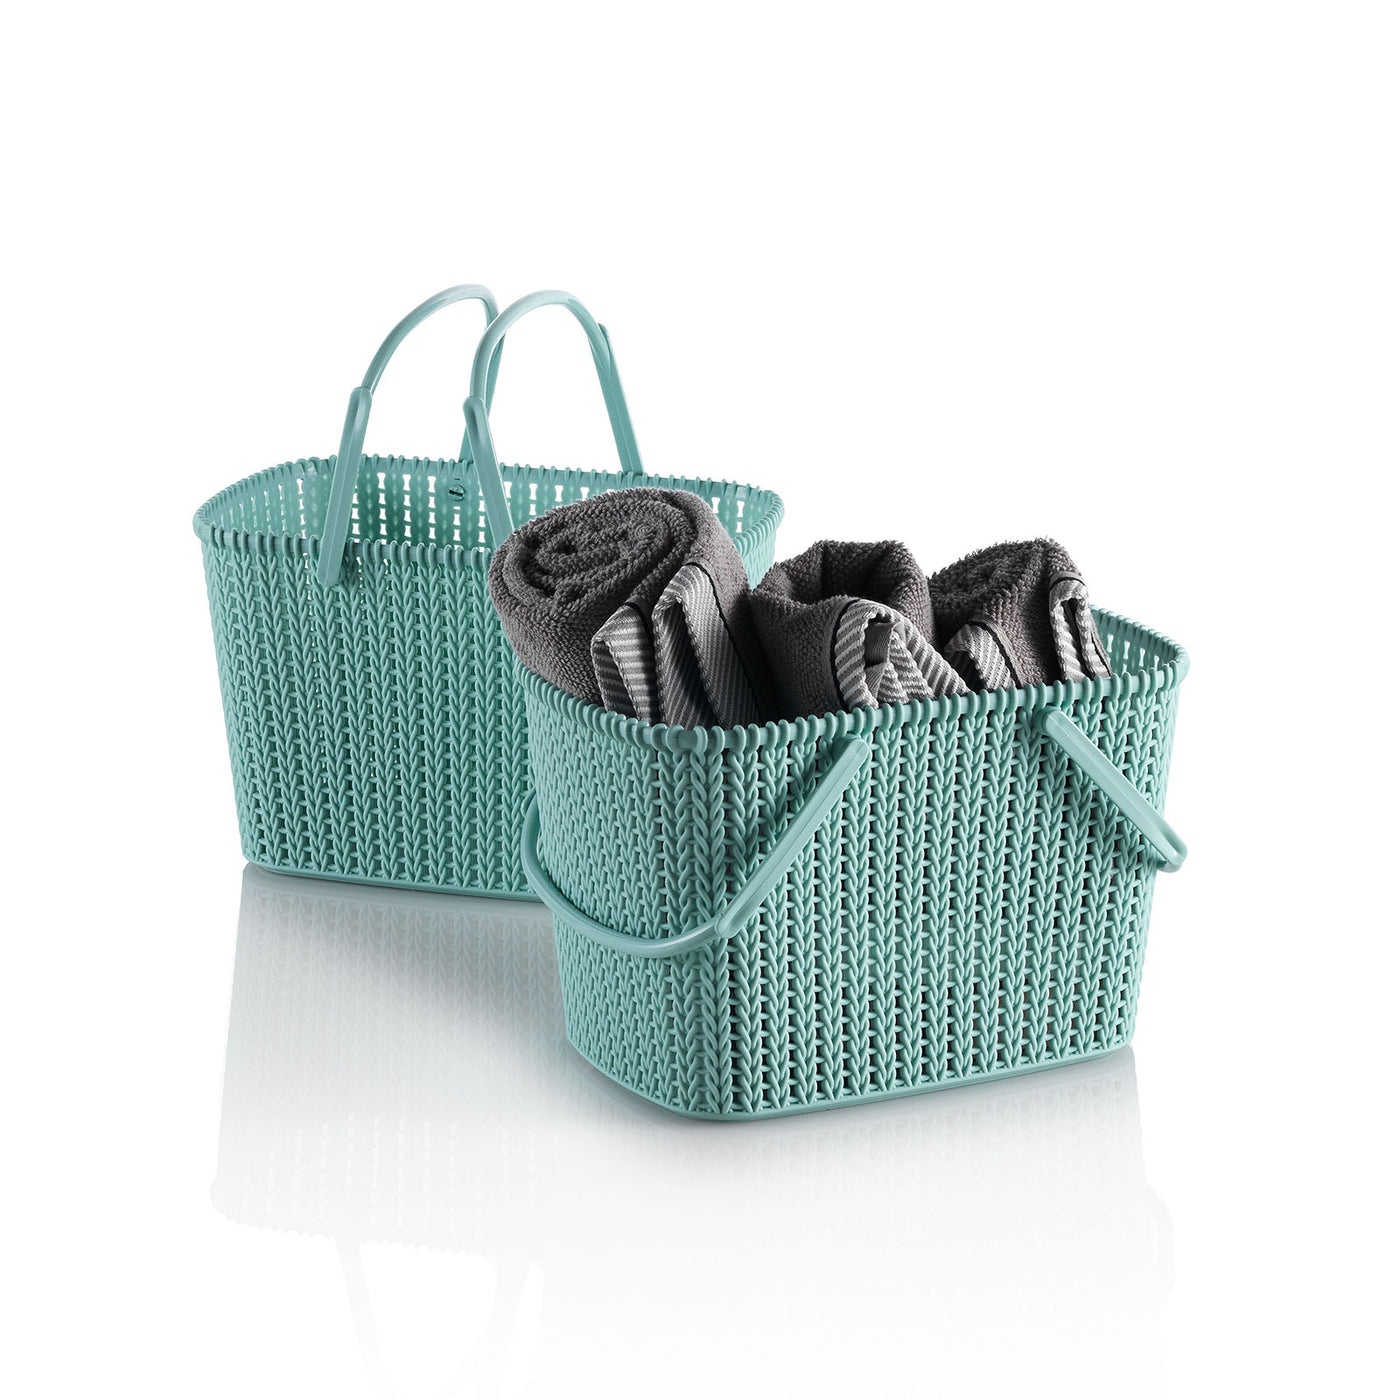 Set of 2 blue MARL storage baskets with handle